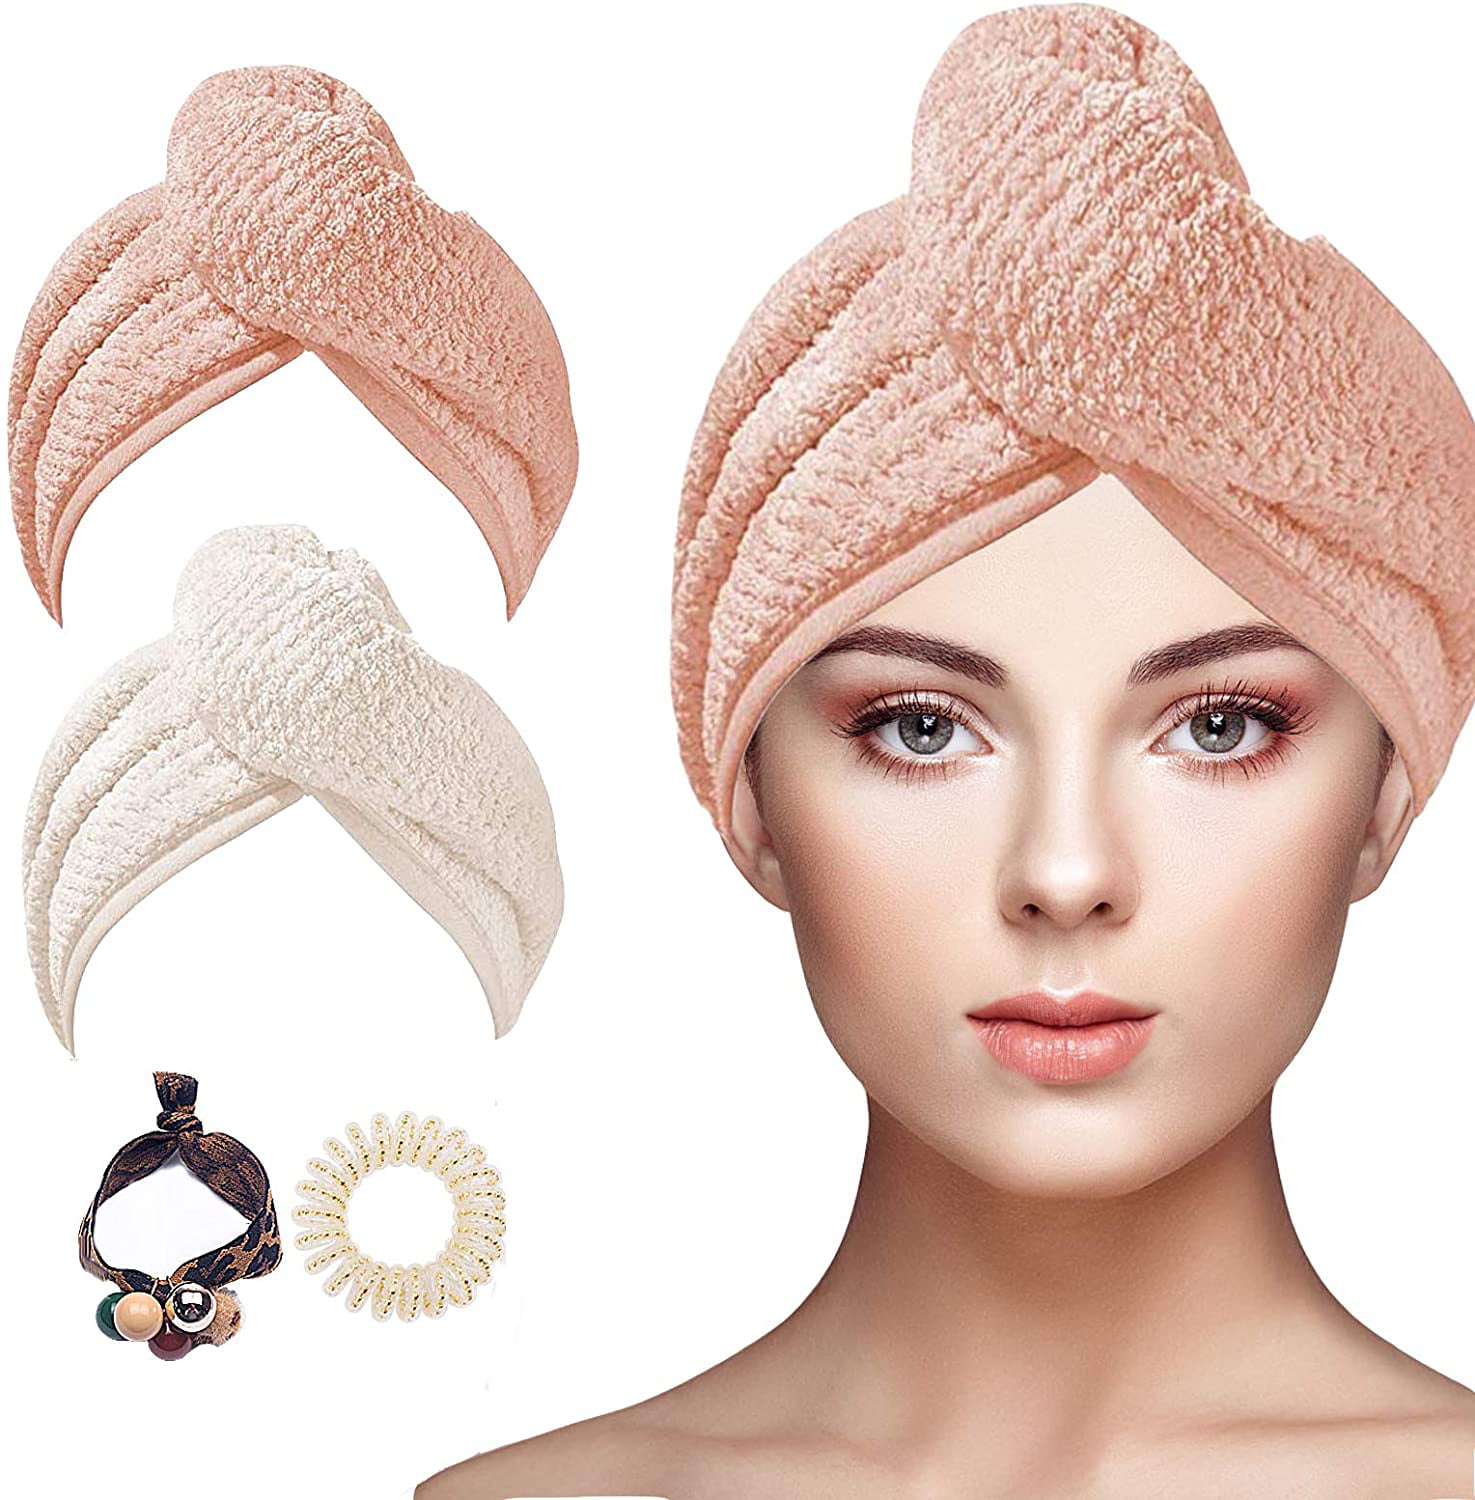 Super Absorbent Quick Dry Turban Details about   Hair Towel Wrap for Women 100% Organic Cotton 